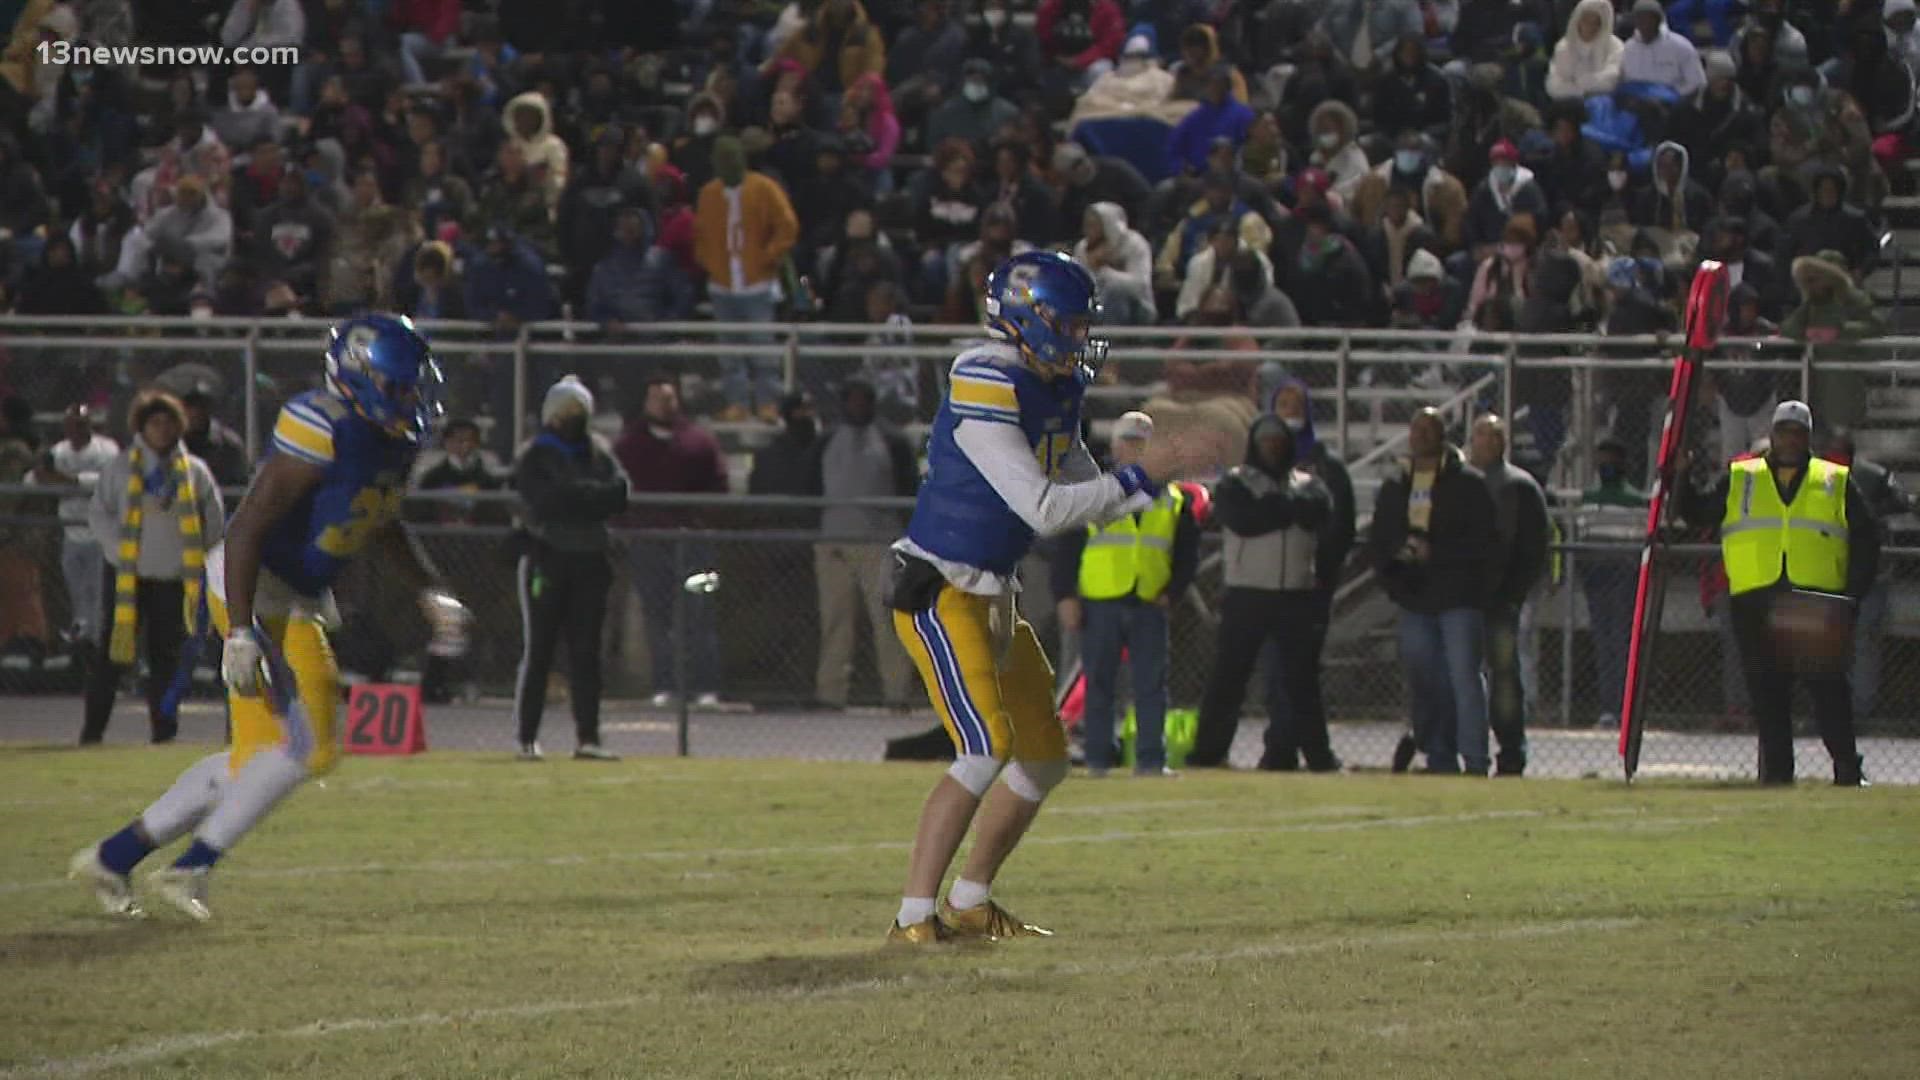 Oscar Smith handed Phoebus (8-1) its first loss of the season.